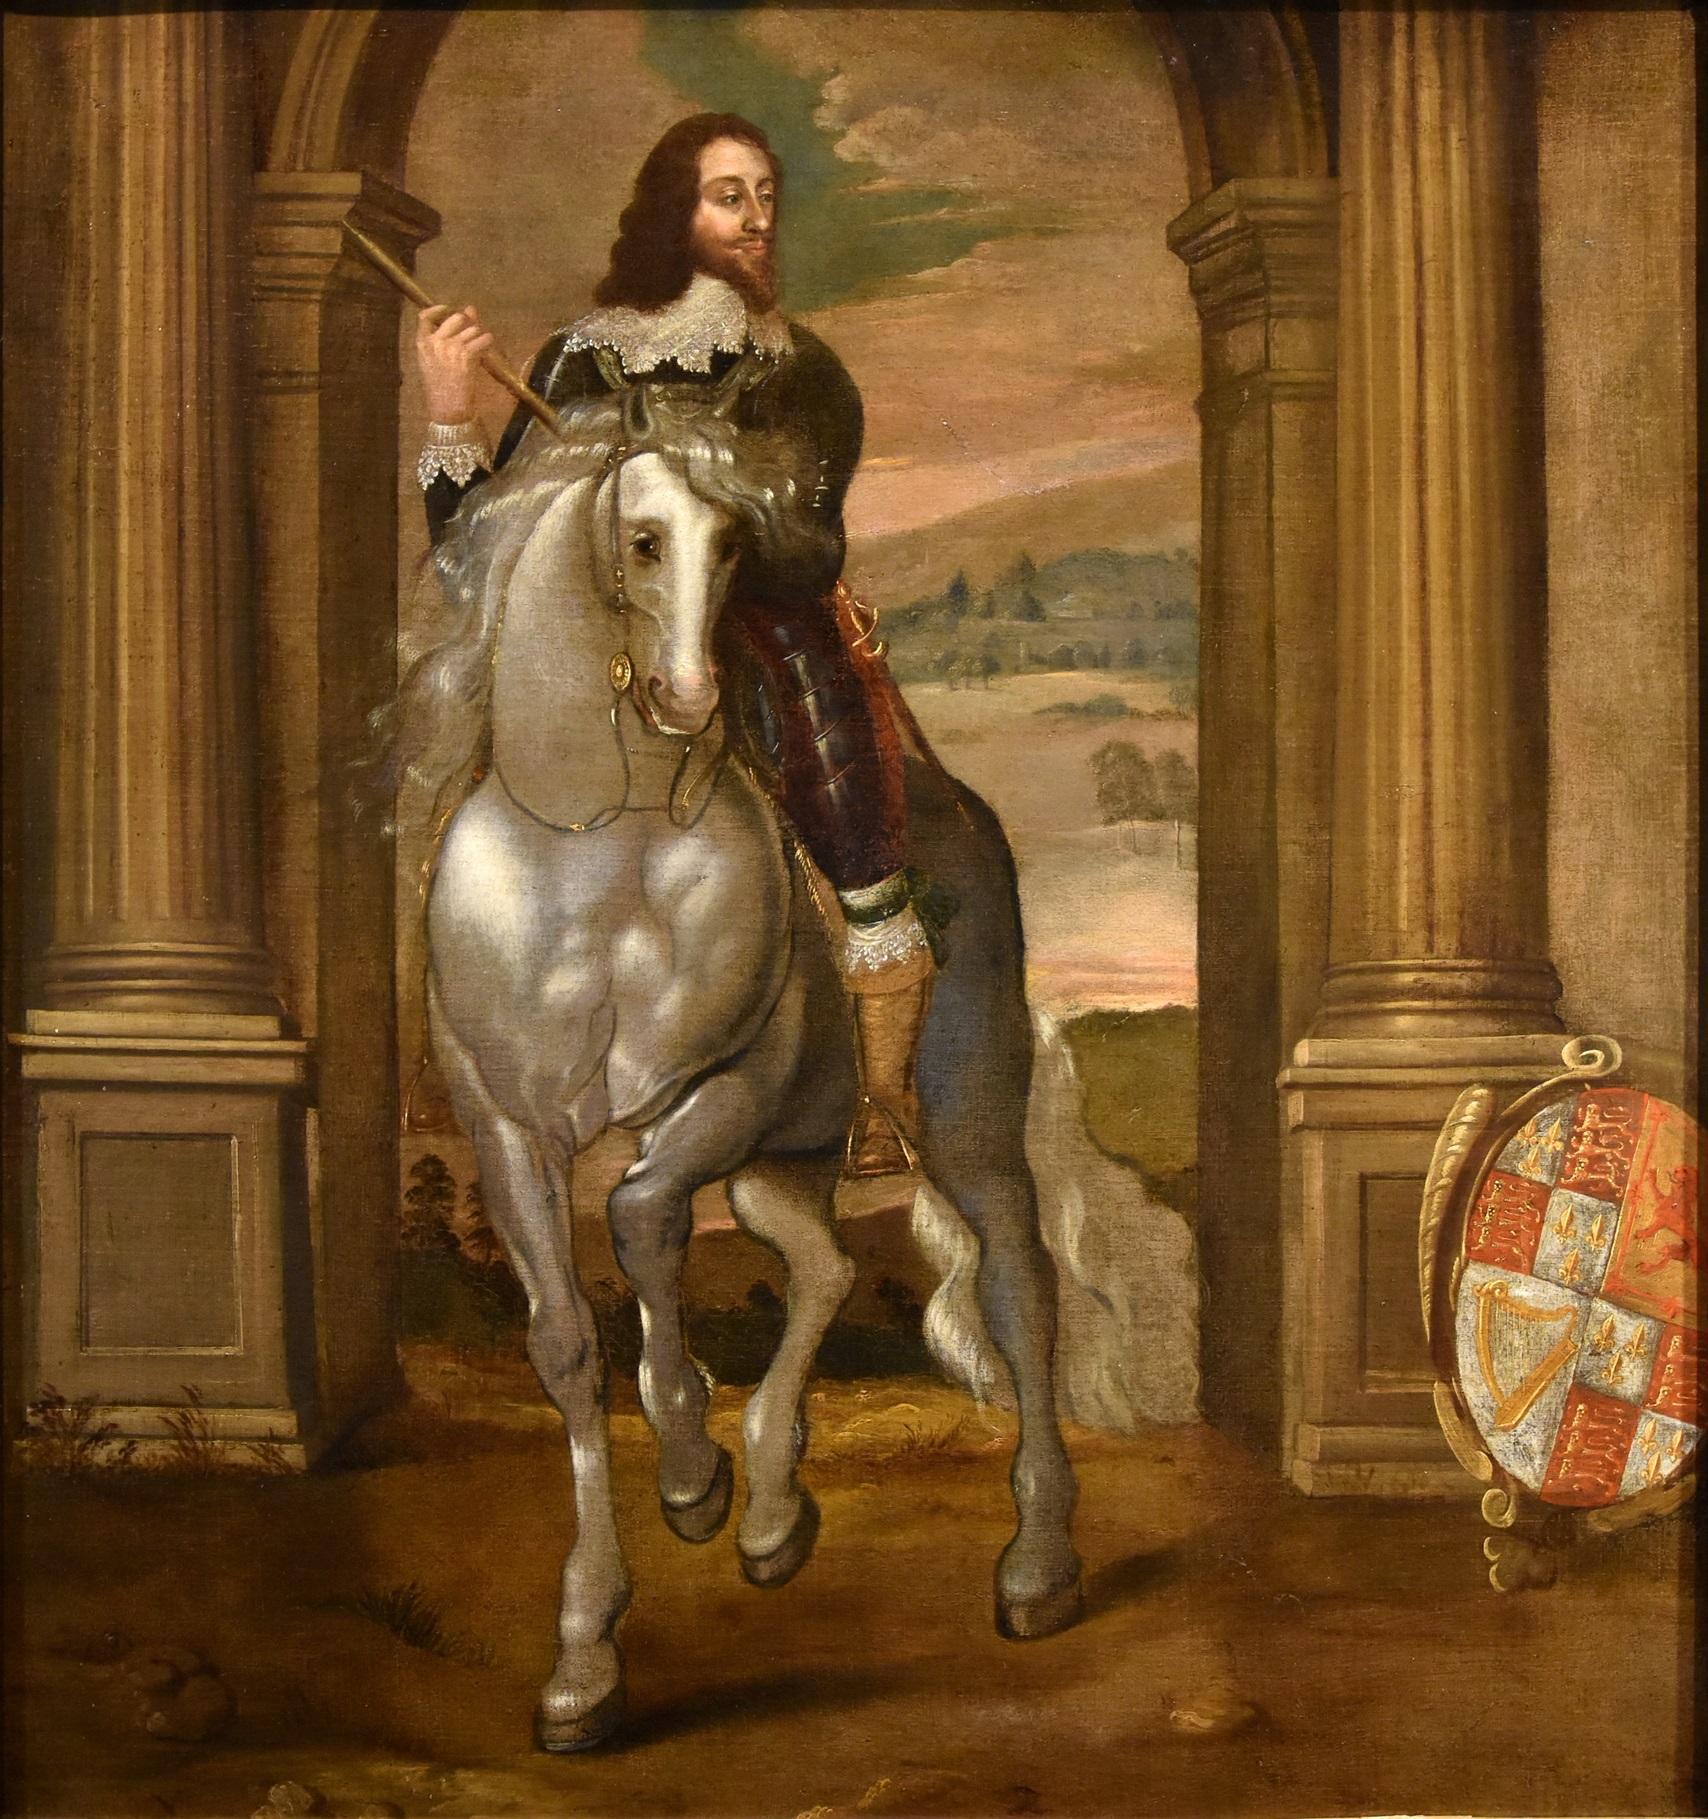 Portrait Charles I King Van Dyck Paint 17/18th Century Oil on canvas Old master  - Painting by  Anthoon Van Dyck (antwerp 1599 - London 1641) 